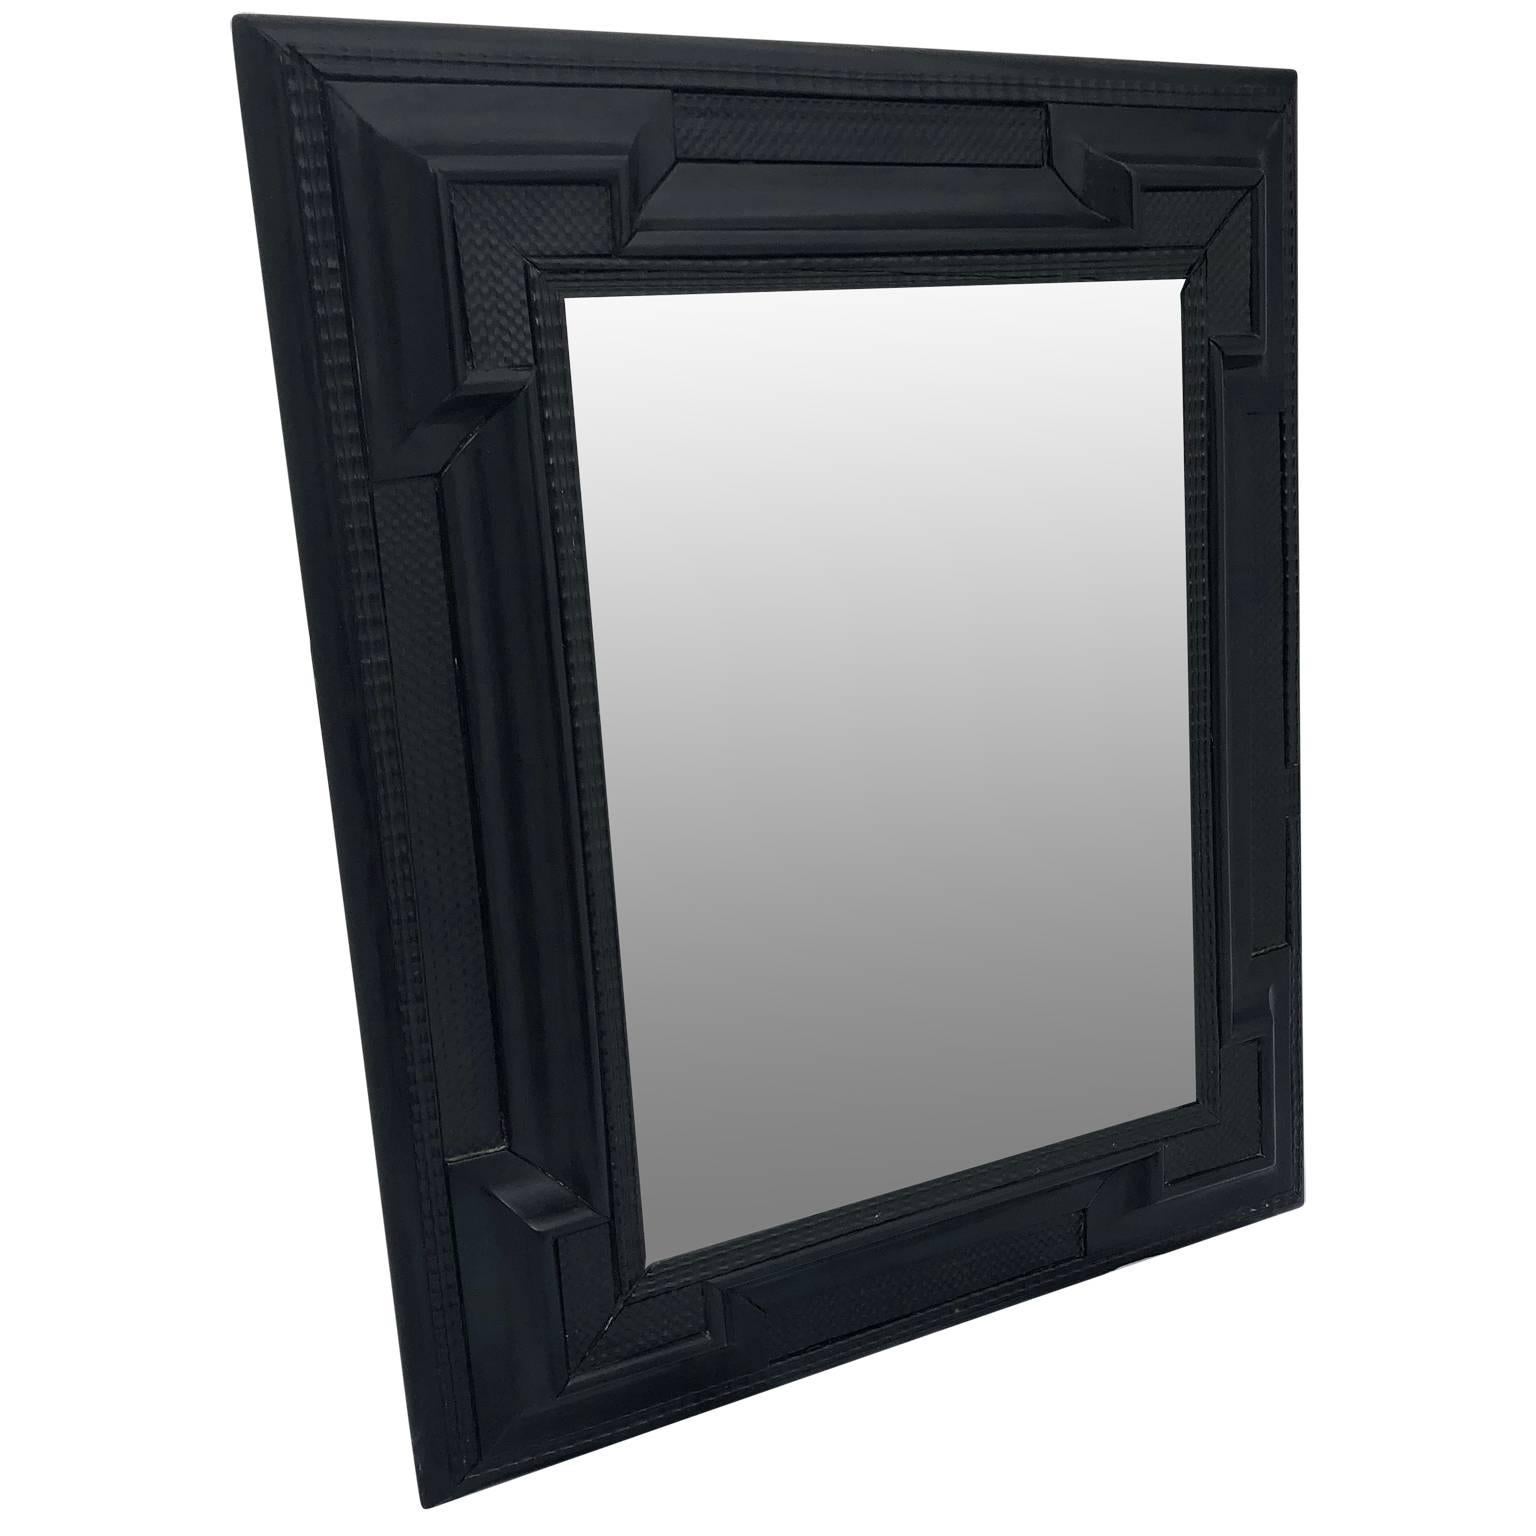 Early Flemish Or Scandinavian ebonized Baroque style wall mirror with bevelled mirror glass